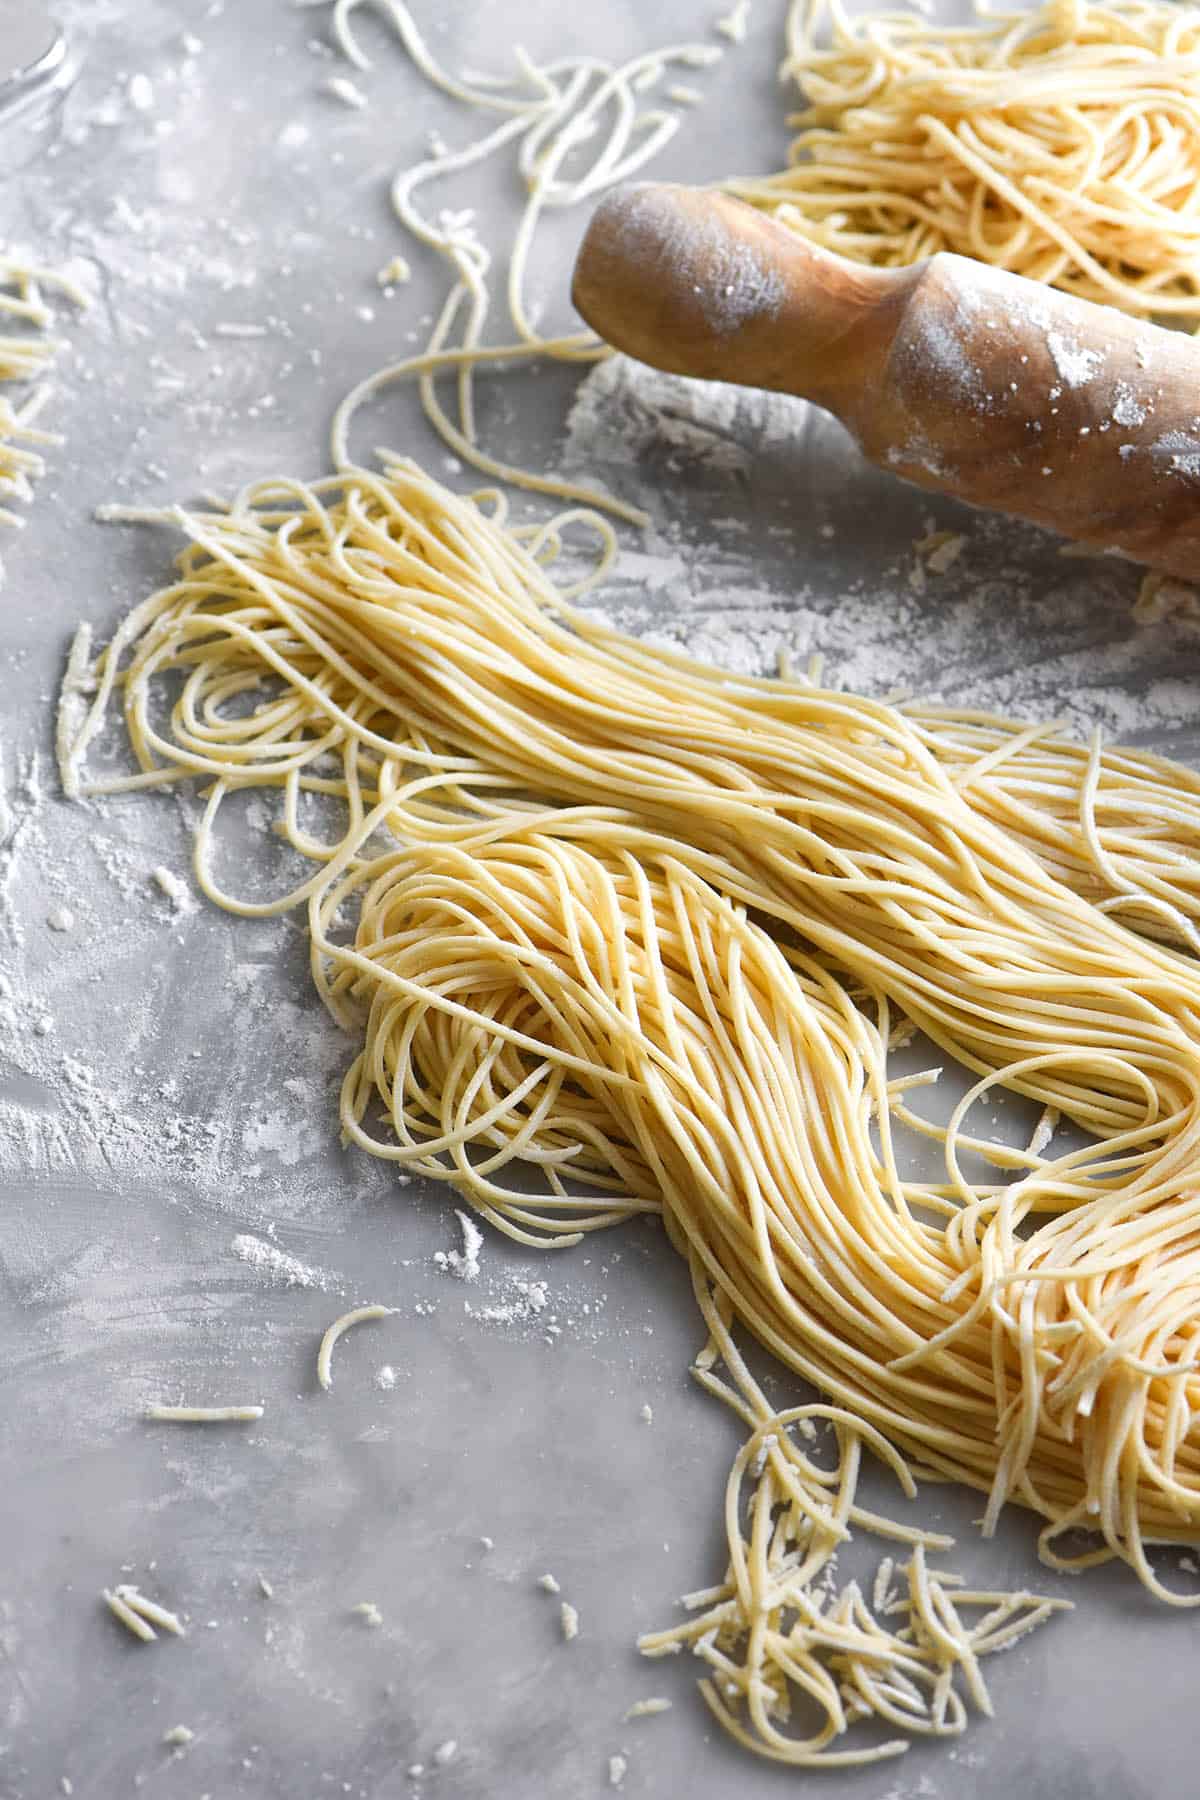 A messy image of gluten free egg noodles being made on a white marble table. They are casually arranged in flowing piles of noodles and a rolling pin sits to the back of the image